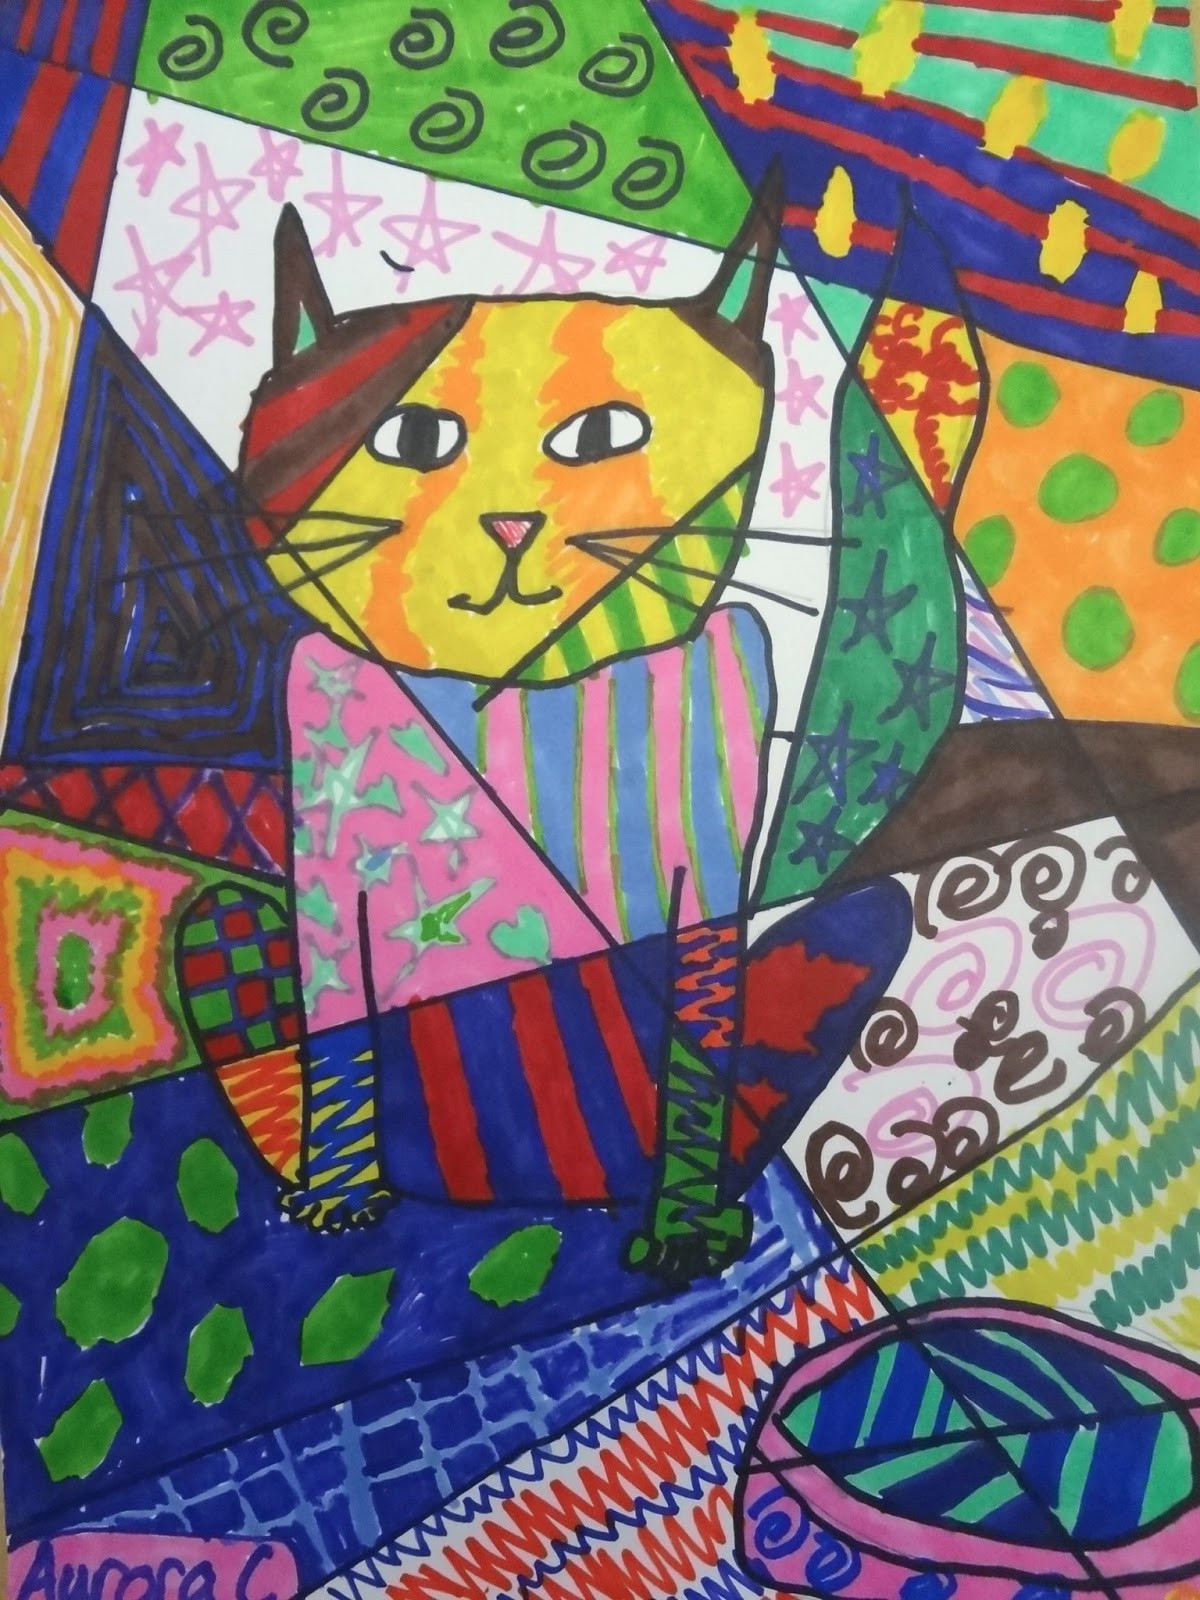 Art Project Ideas For Toddlers
 The Talking Walls Romero Britto Art Lesson for Kids